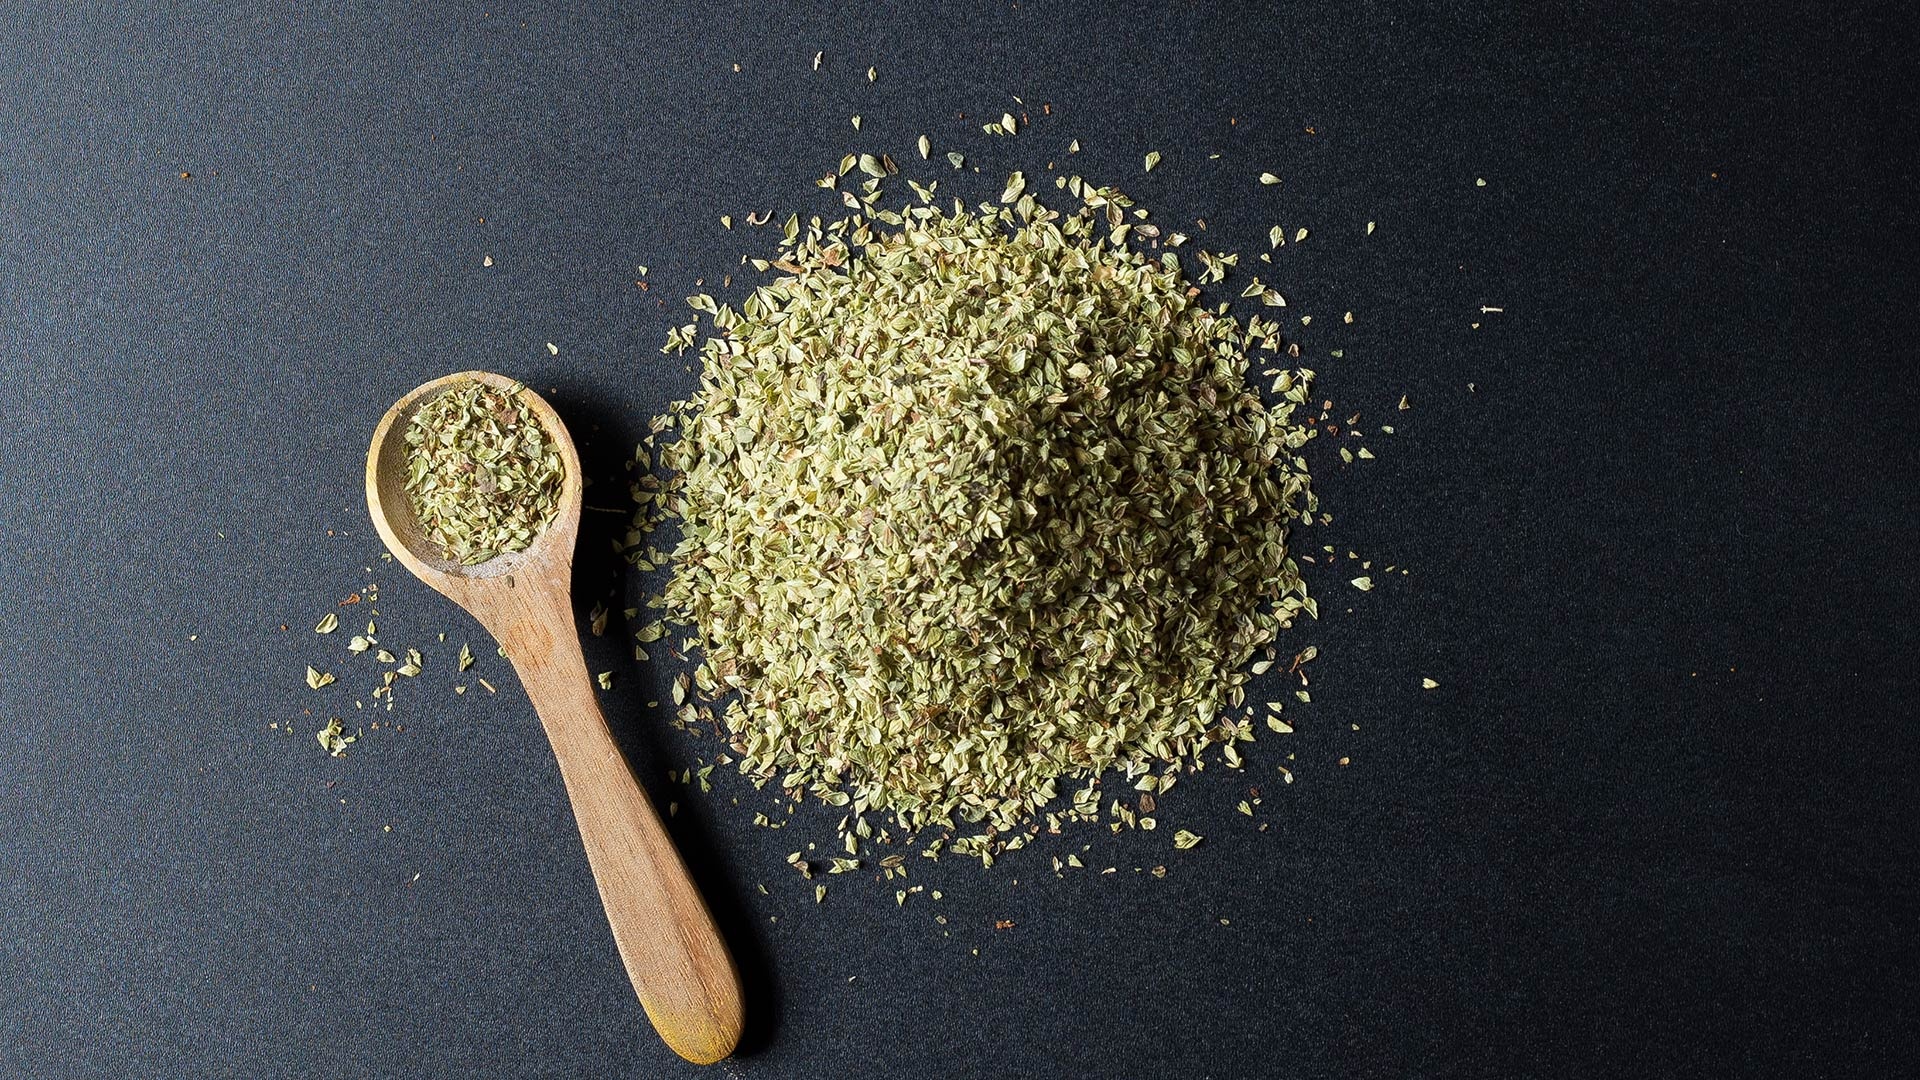 Cooking and seasoning with oregano, Fuchs spices, Flavor tips, Culinary delights, 1920x1080 Full HD Desktop